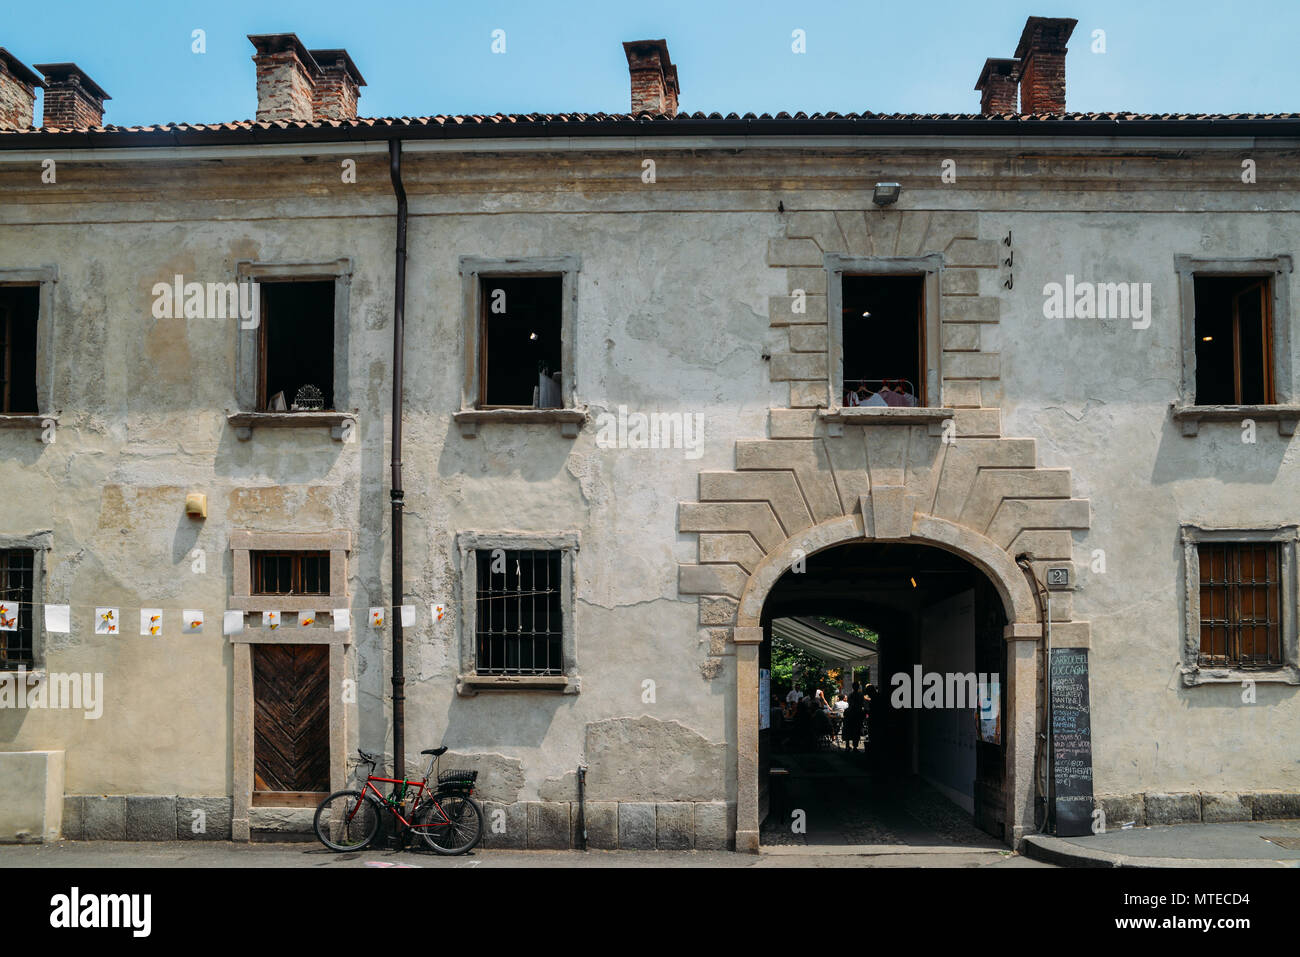 Cascina Cuccagna is the msot central of public farmhouses in the Milan area and was the subject of an exemplary urban regeneration project aimed at the restoration of the 17th century farm Stock Photo